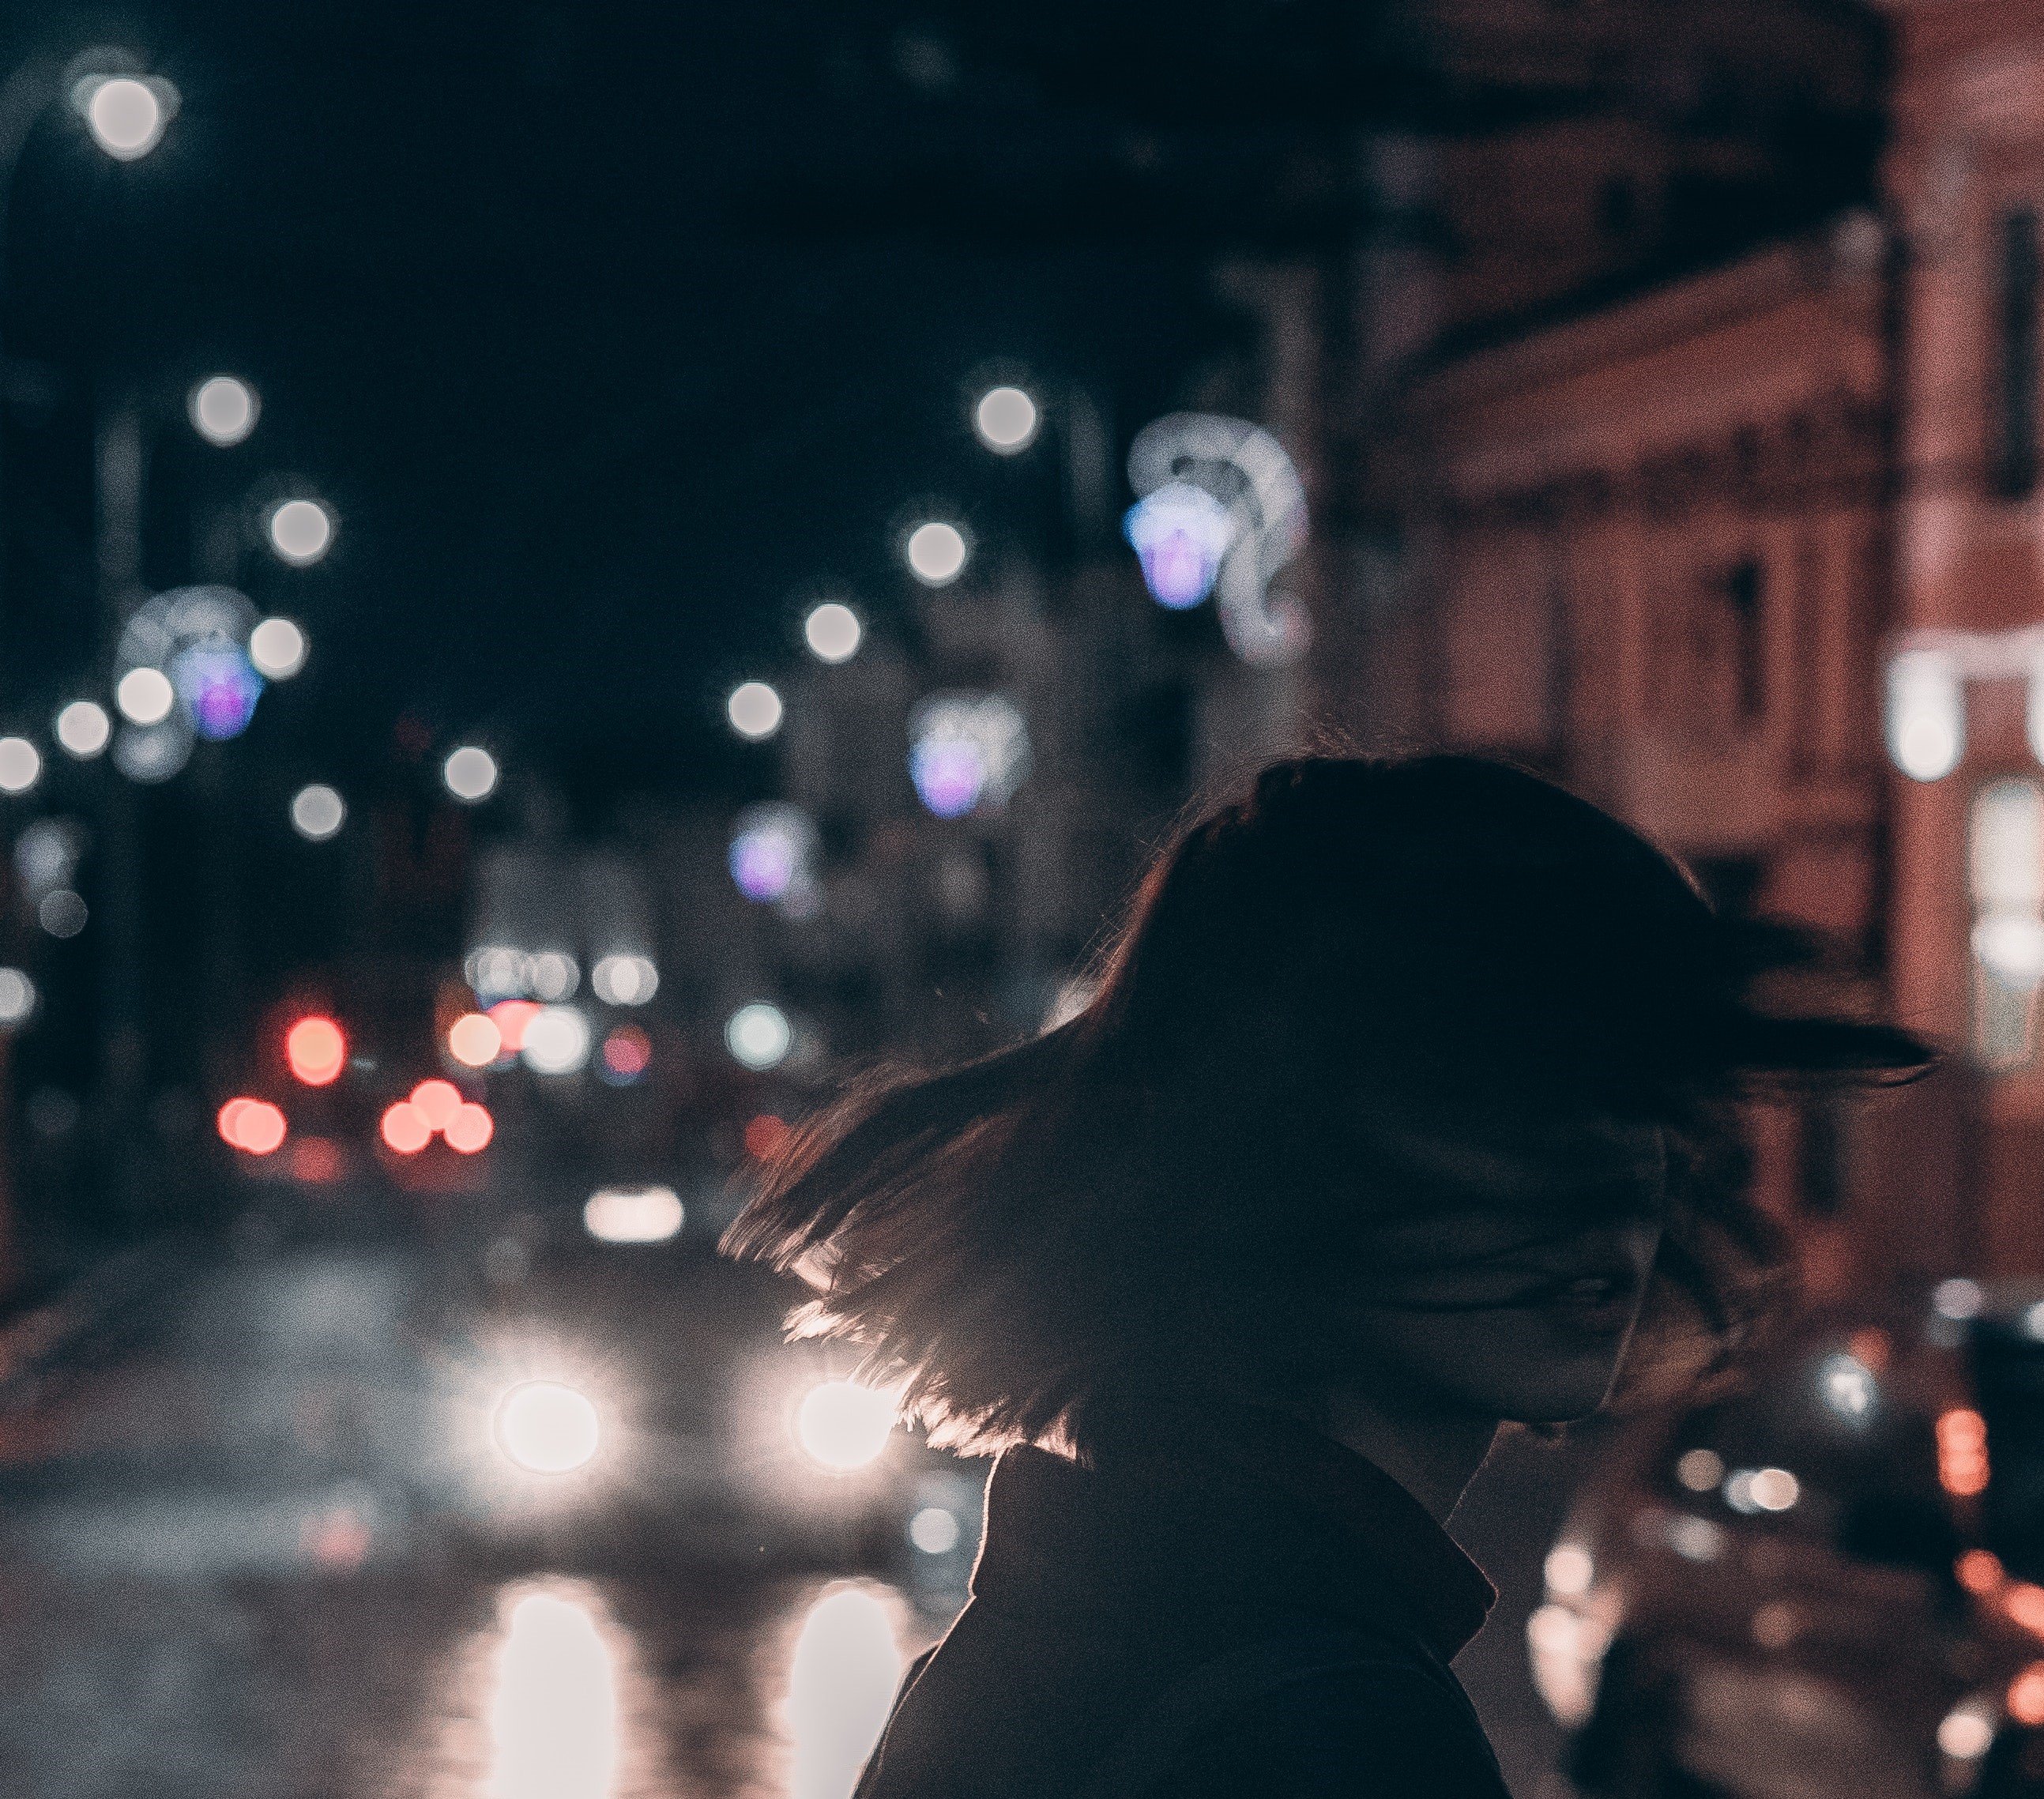 The woman escaped & sprinted home | Photo: Pexels